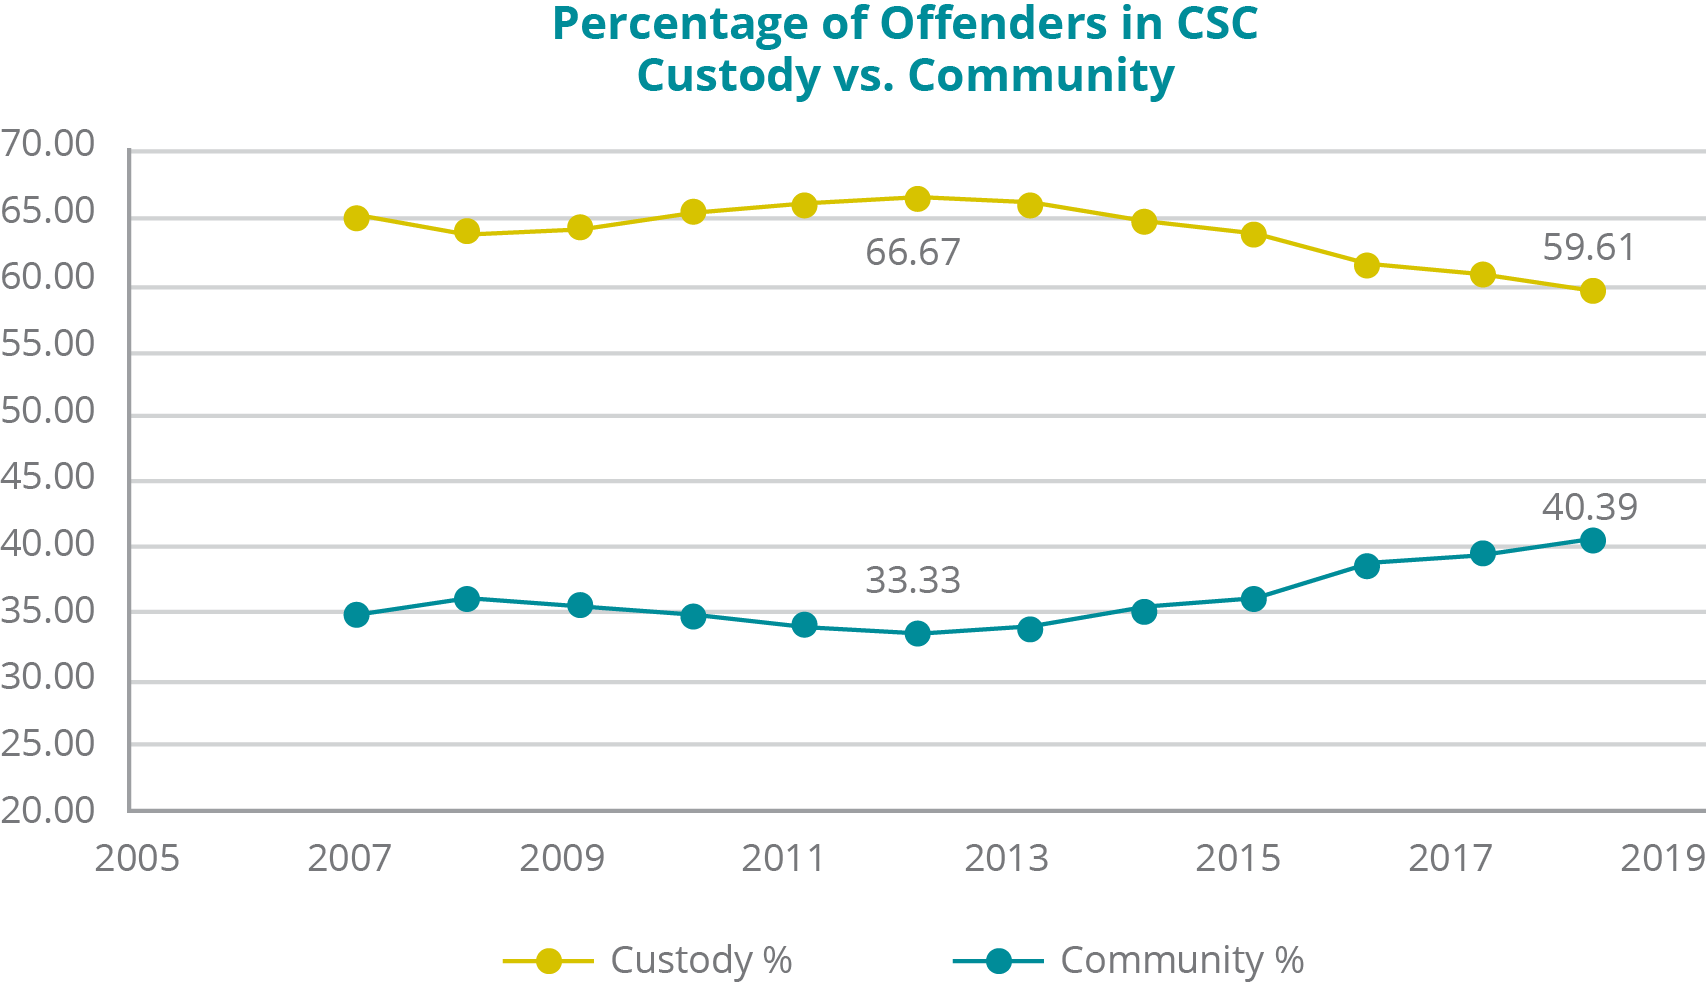 A graph depicting the percentage of offenders in CSC custody versus in the community from 2007 to 2019: - In Custody: In 2007, 65.22%; 2008, 63.83%; 2009, 64.31%; 2010, 65.45%; 2011, 66.11%; 2012, 66.67%; 2013, 66.14%; 2014, 64.83%; 2015, 63.81%; 2016, 61.44%; 2017, 60.68%; 2018, 59.61%. - In the Community: In 2007, 34.78%; 2008, 36.17%; 2009, 35.69%; 2010, 34.55%; 2011, 33.89%; 2012, 33.33%; 2013, 33.86%; 2014, 35.17%; 2015, 36.19%; 2016, 38.56%; 2017, 39.32%; 2018, 40.39%.